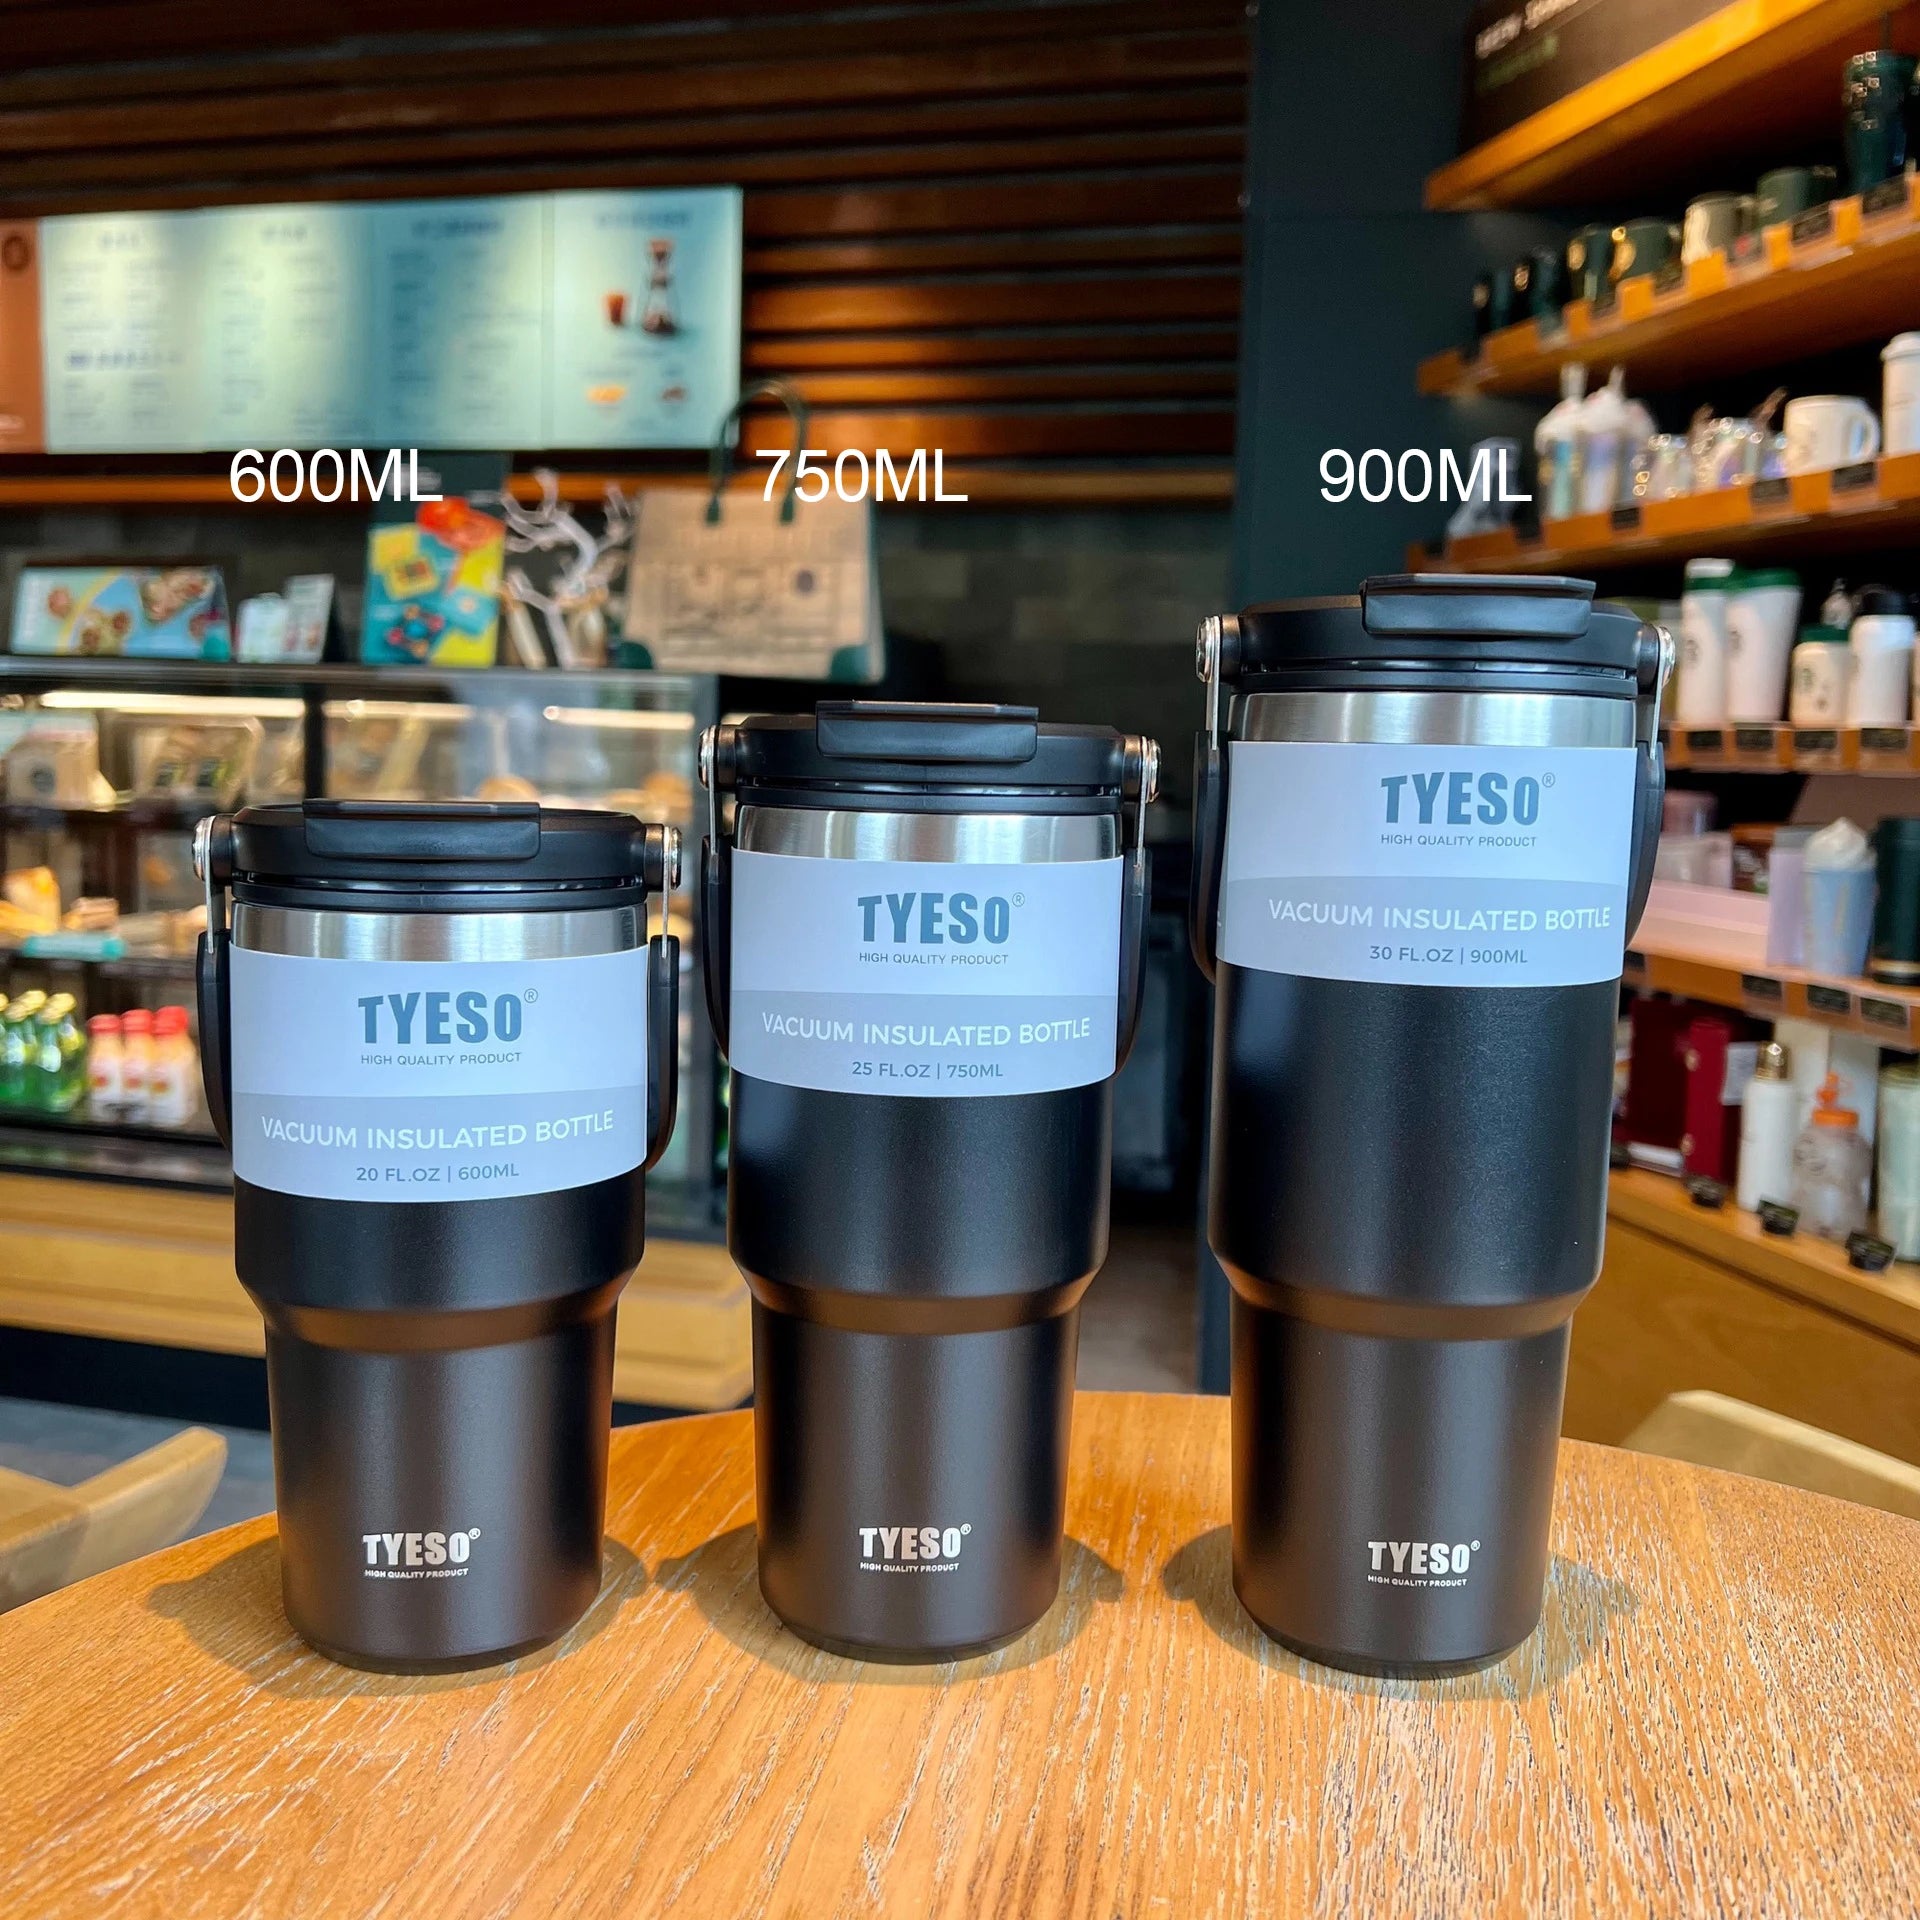 Tyeso Coffee Cup Stainless Steel Thermos Bottle - Double-layer Insulation for Cold and Hot Drinks, Travel Mug, Vacuum Flask, Car Water Bottle Black-1pcs / 600ML